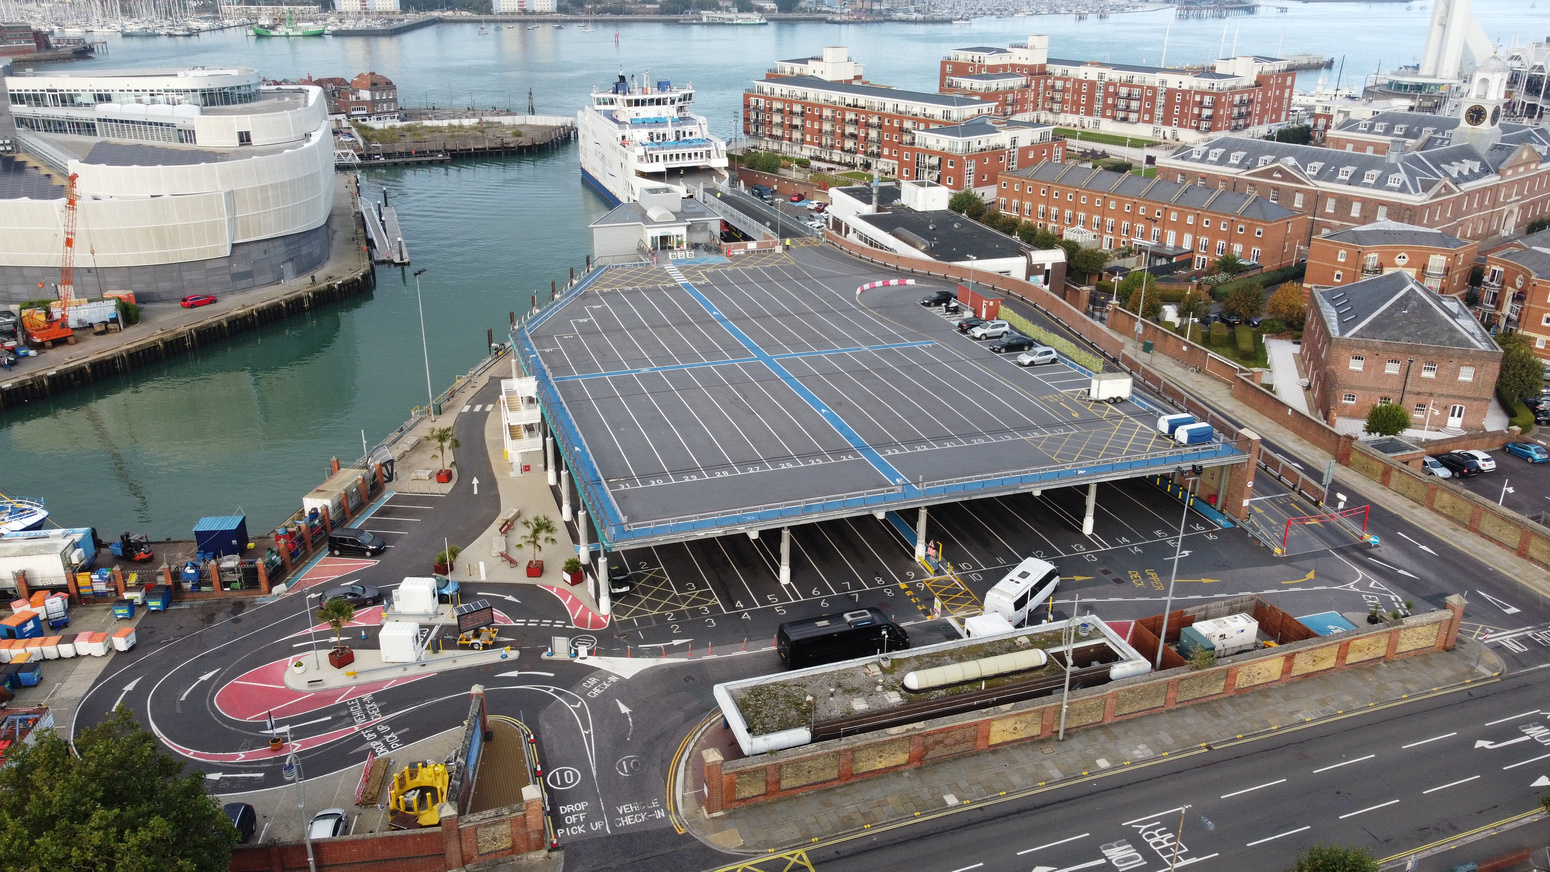 Aerial view of Wightlink's Portsmouth Gunwharf port